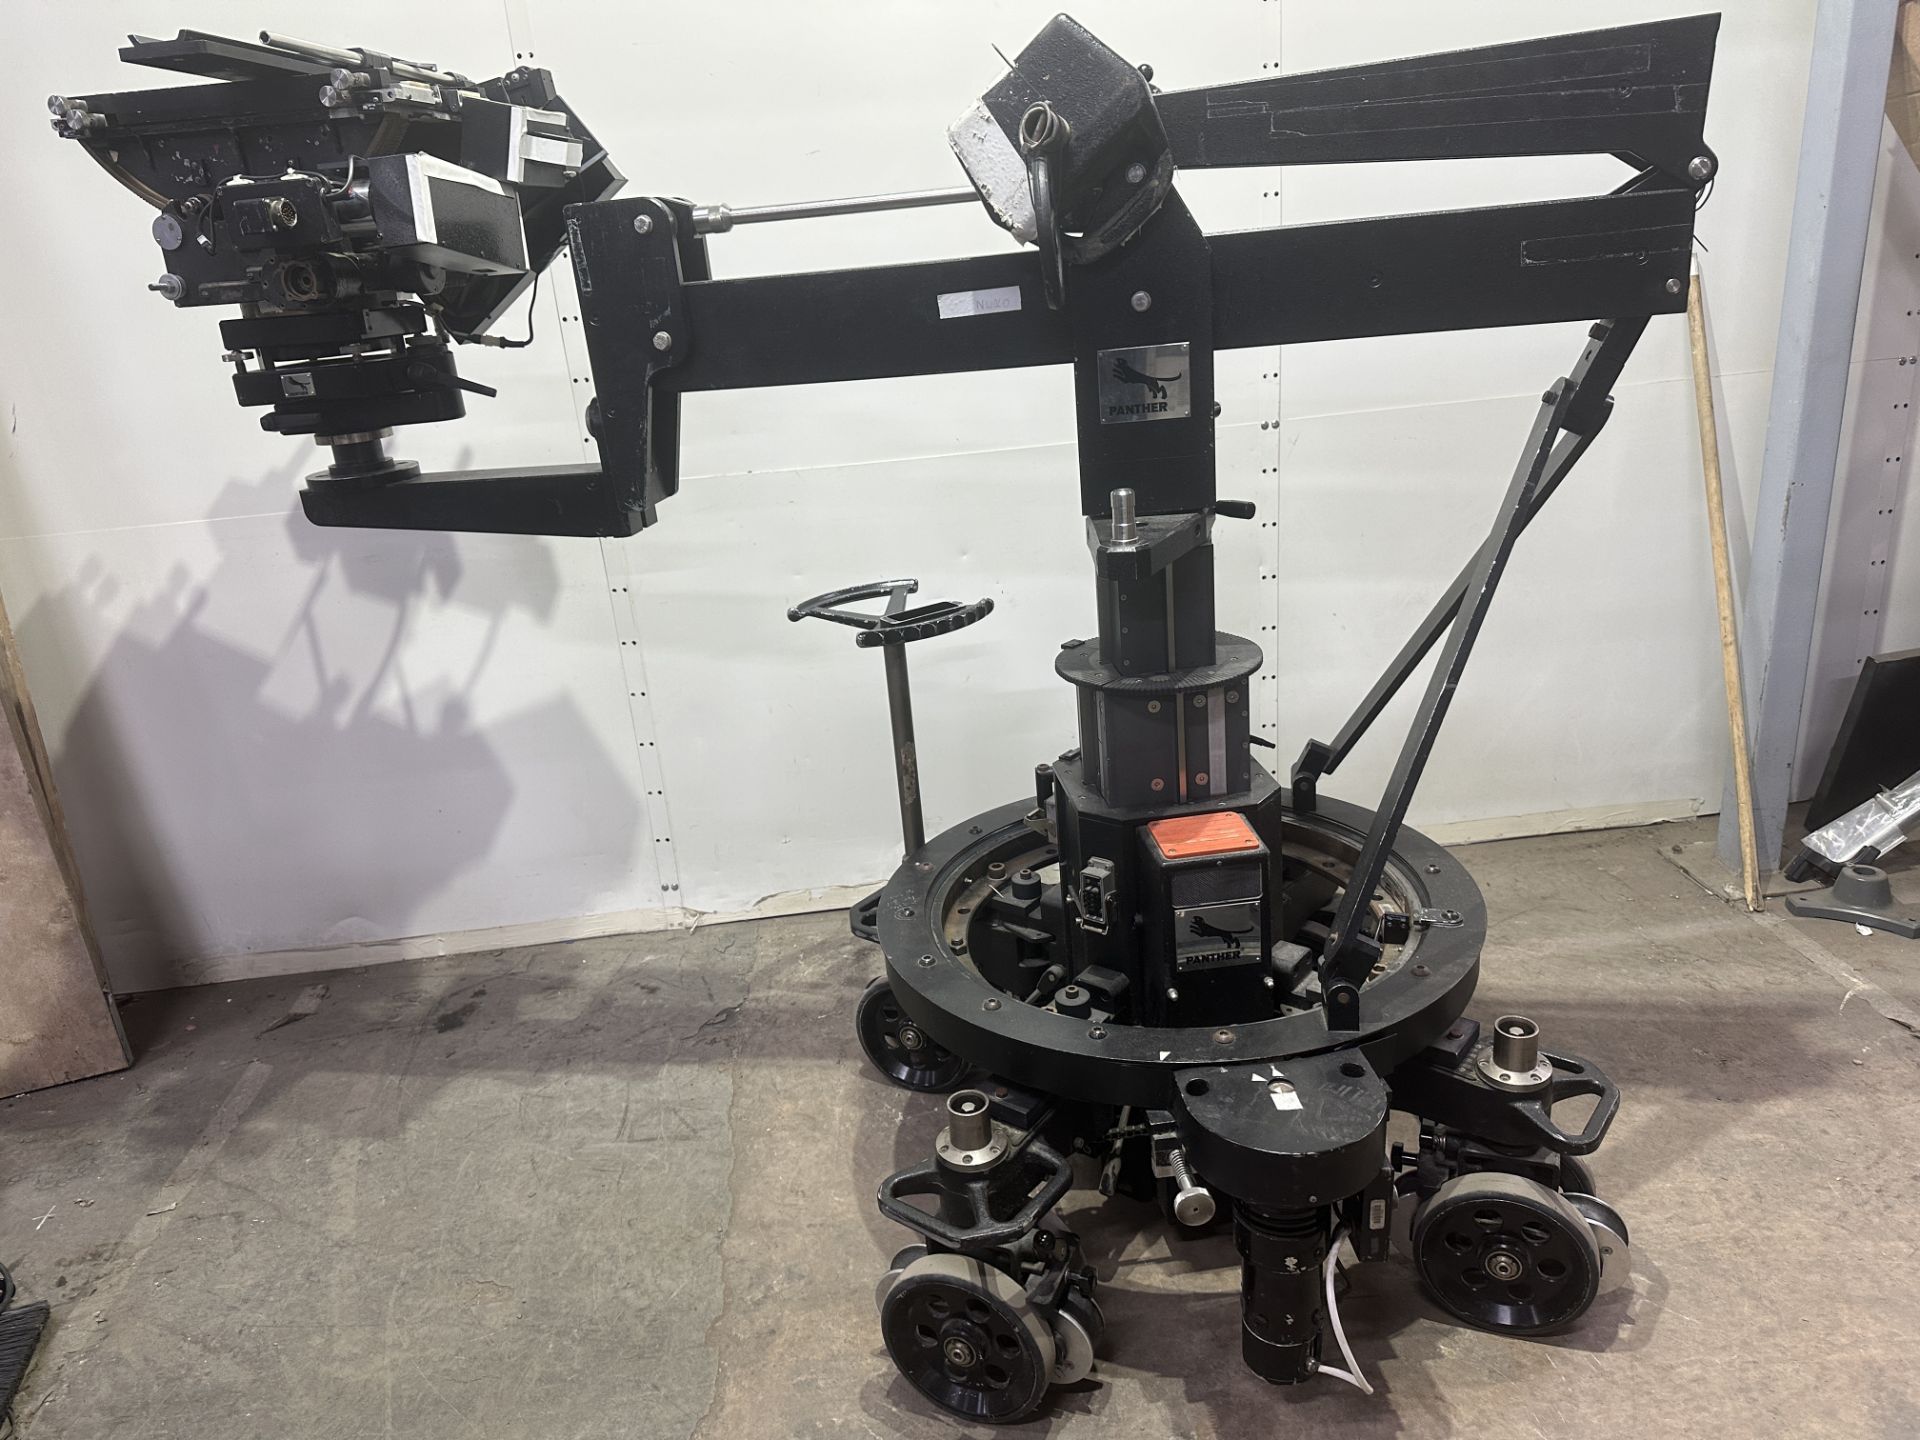 Super Panther 3 fitted with a Super Jib jib arm with 2 lengths of track